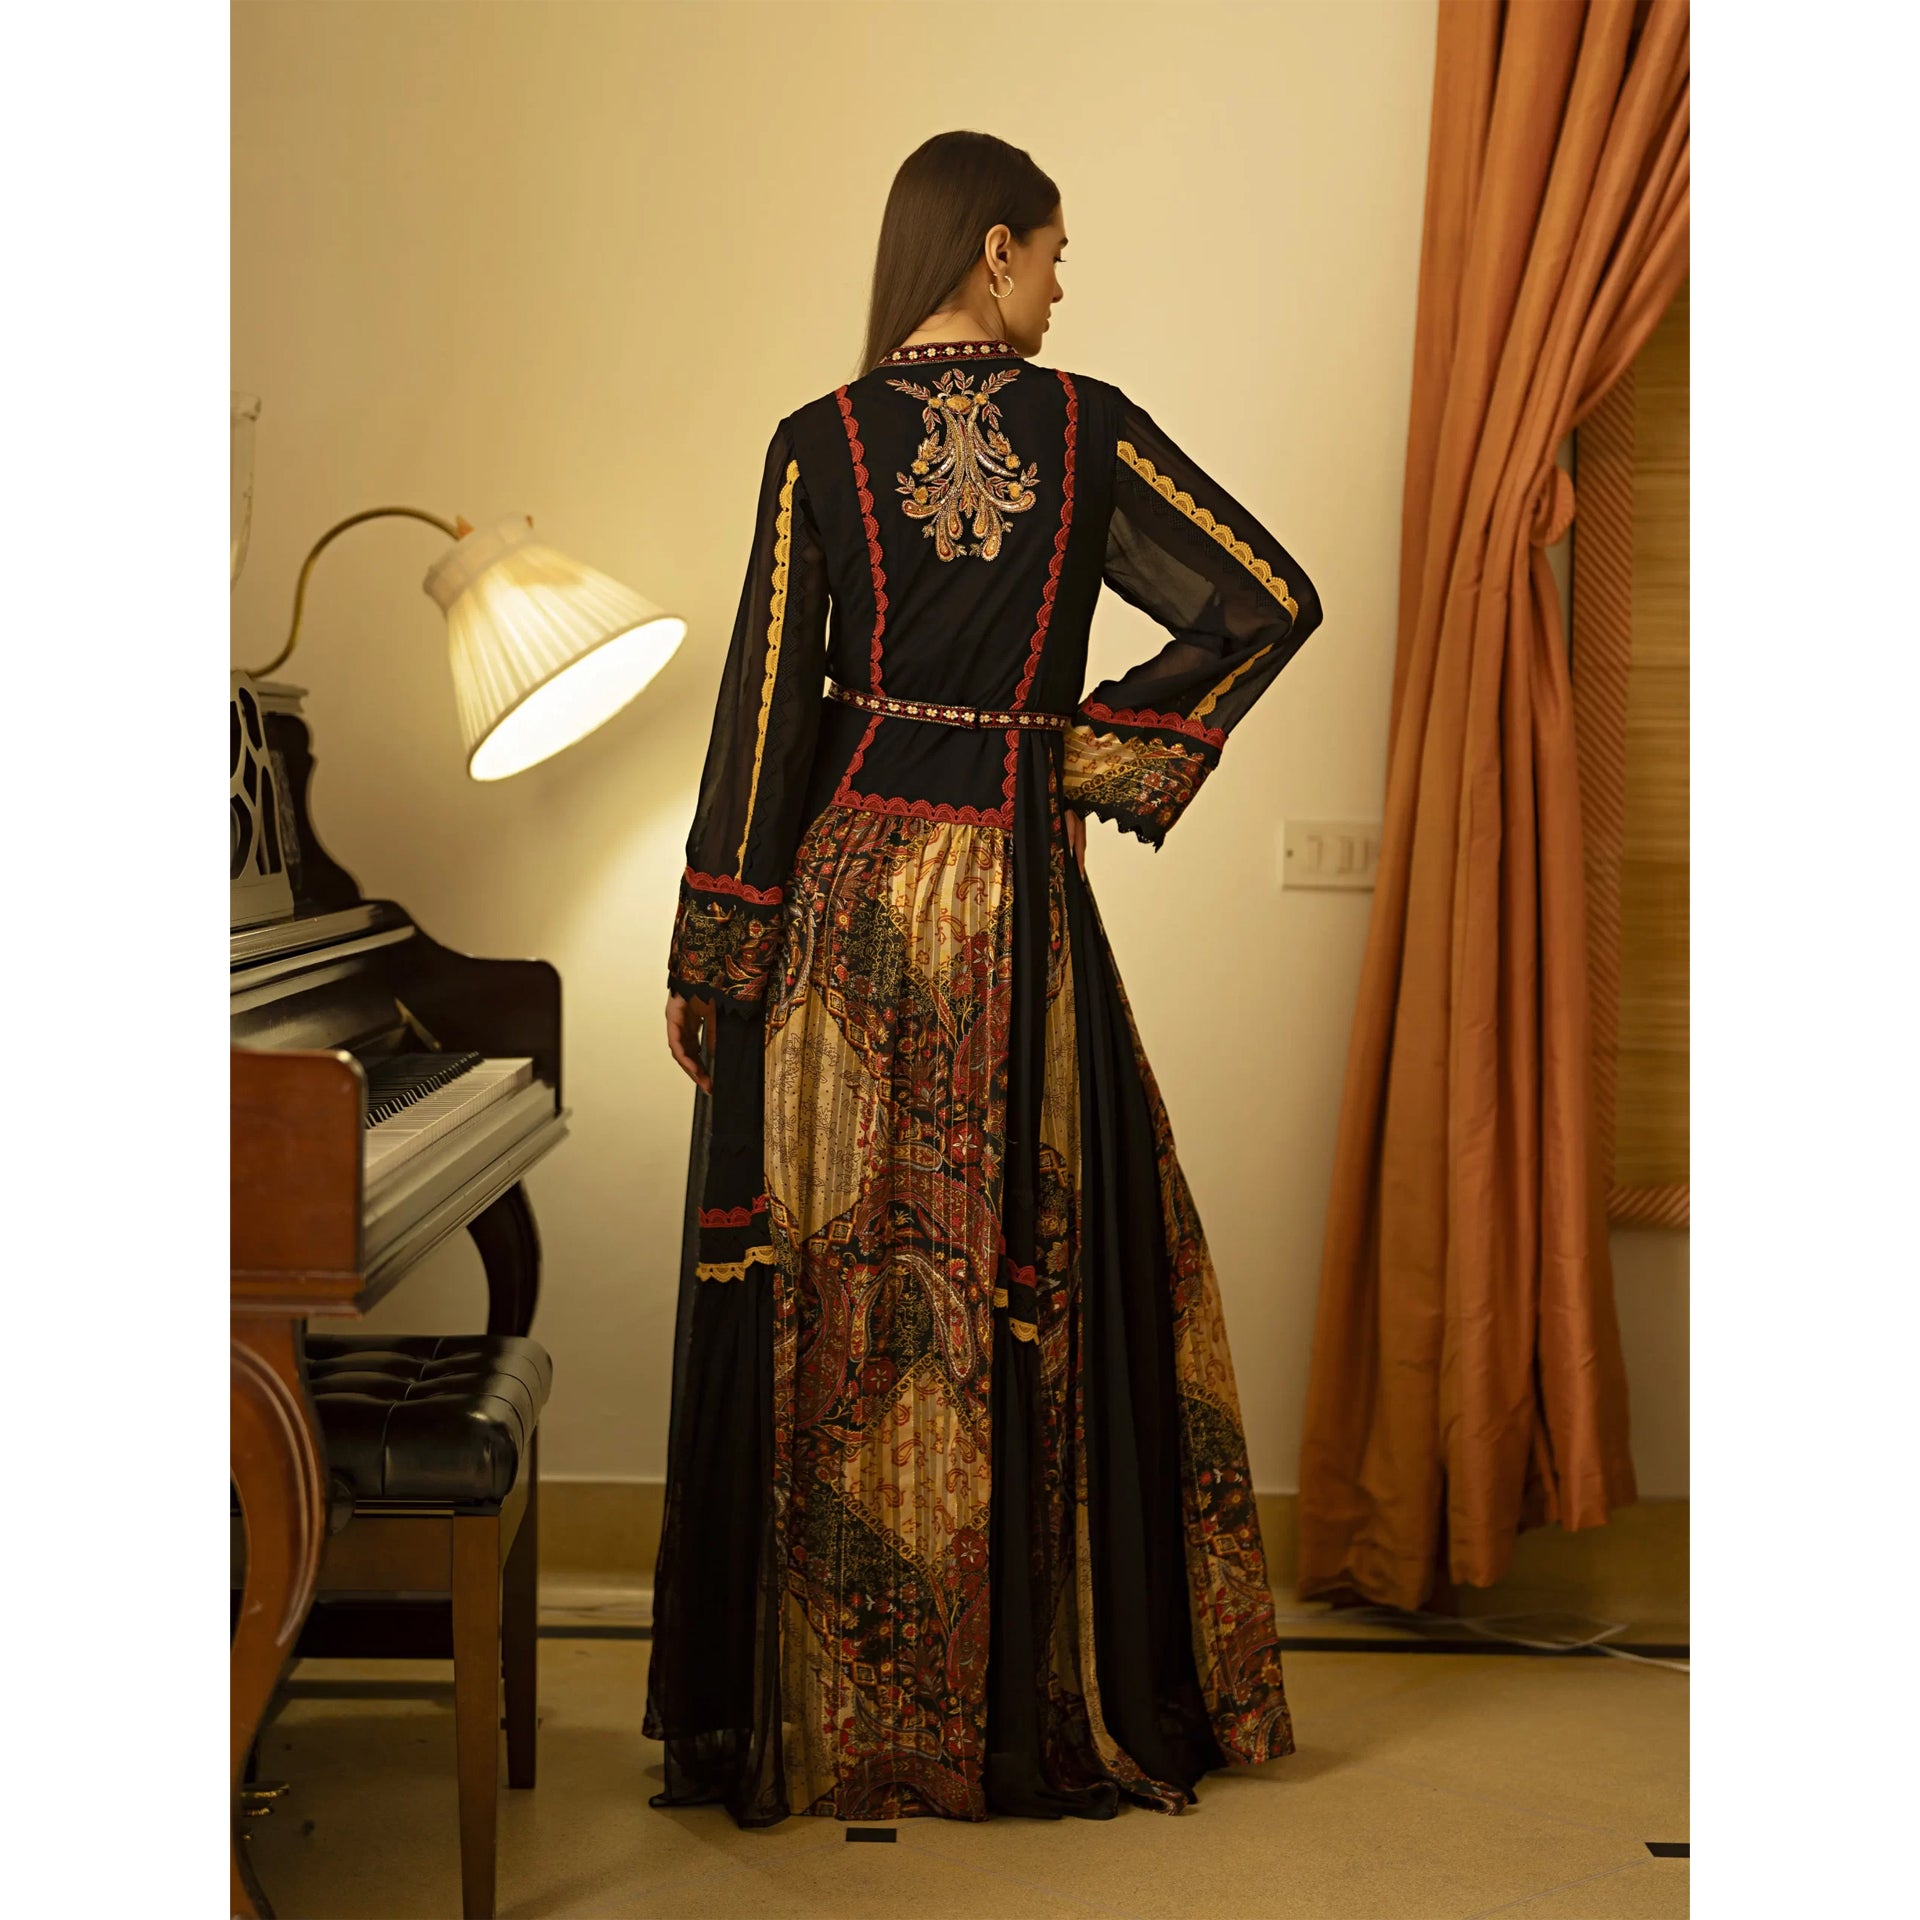 Black Embroidery Eozal Dress with Long Sleeves And Mixed Material From Shalky